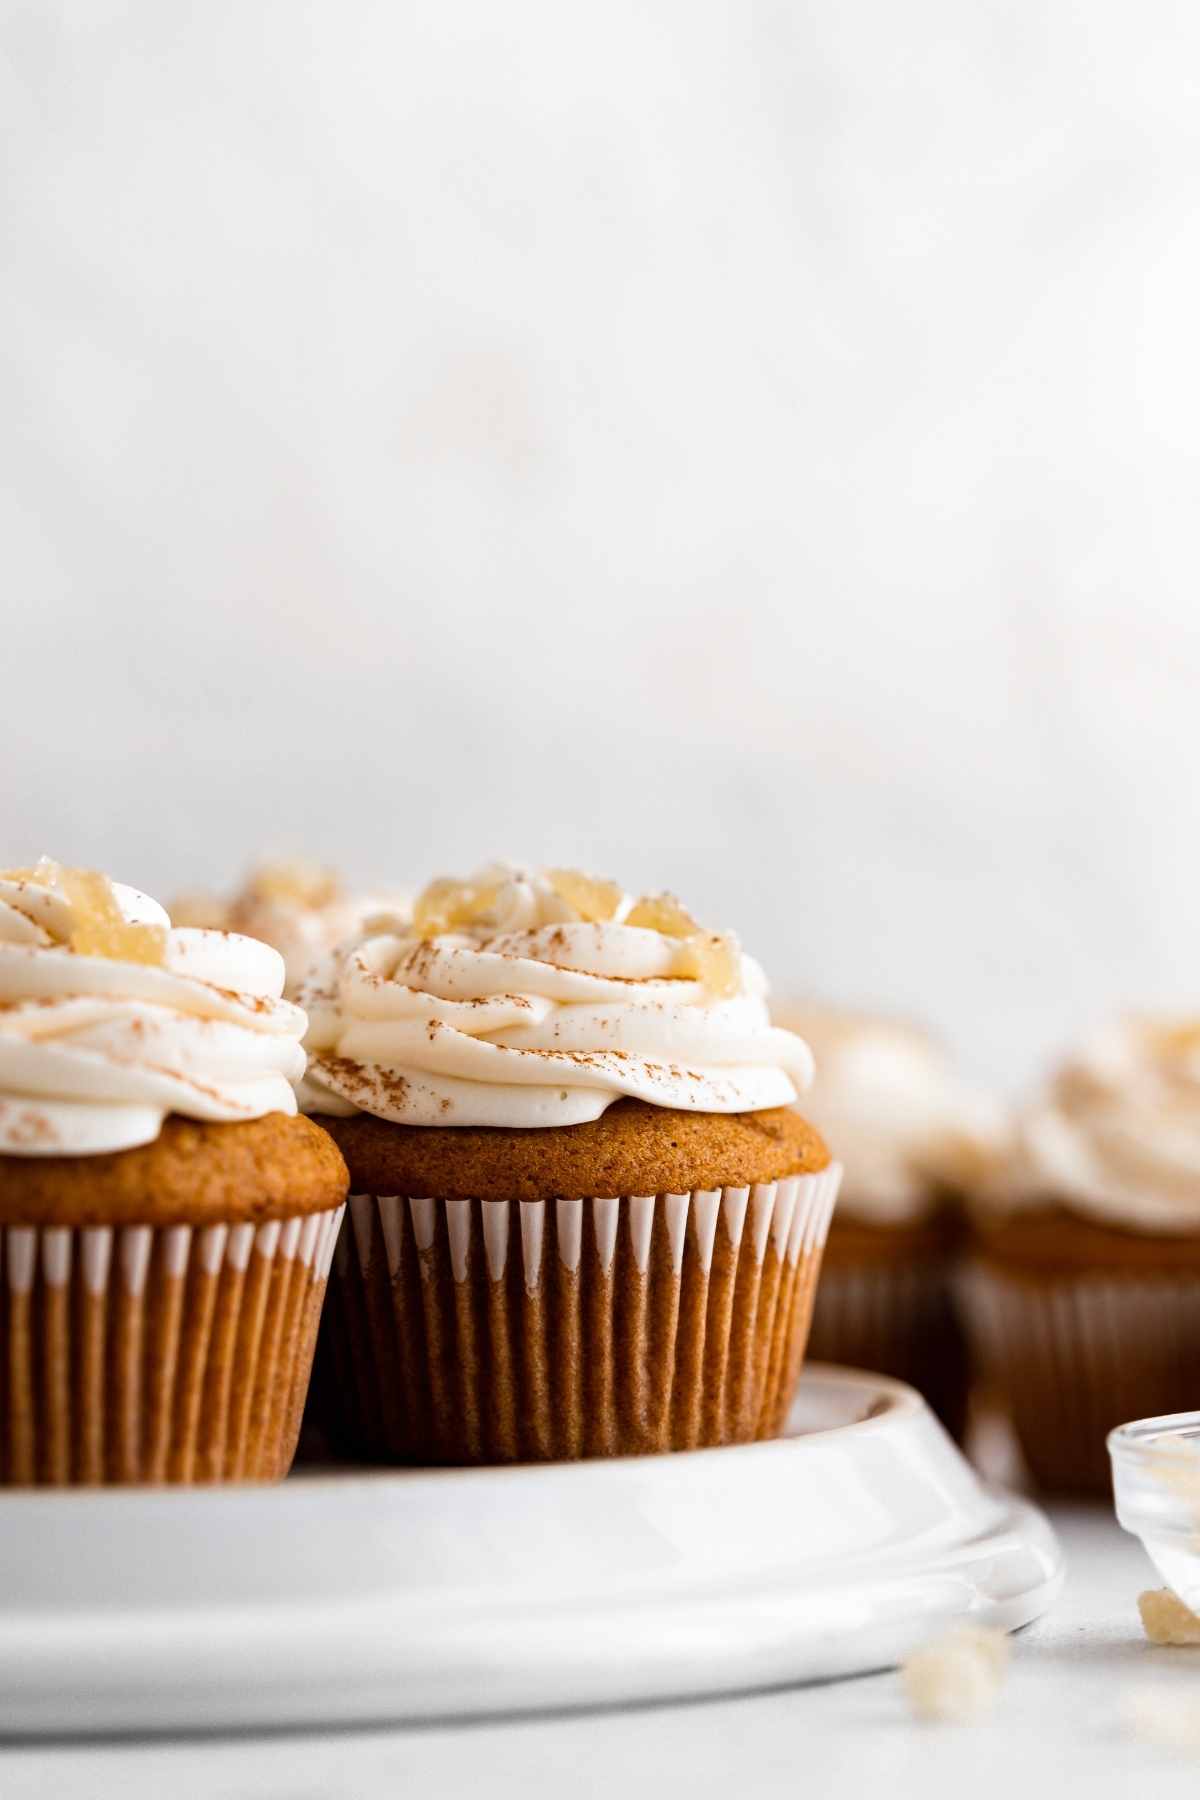 Pumpkin Ginger Cupcakes with cream cheese frosting swirl and candied ginger garnish